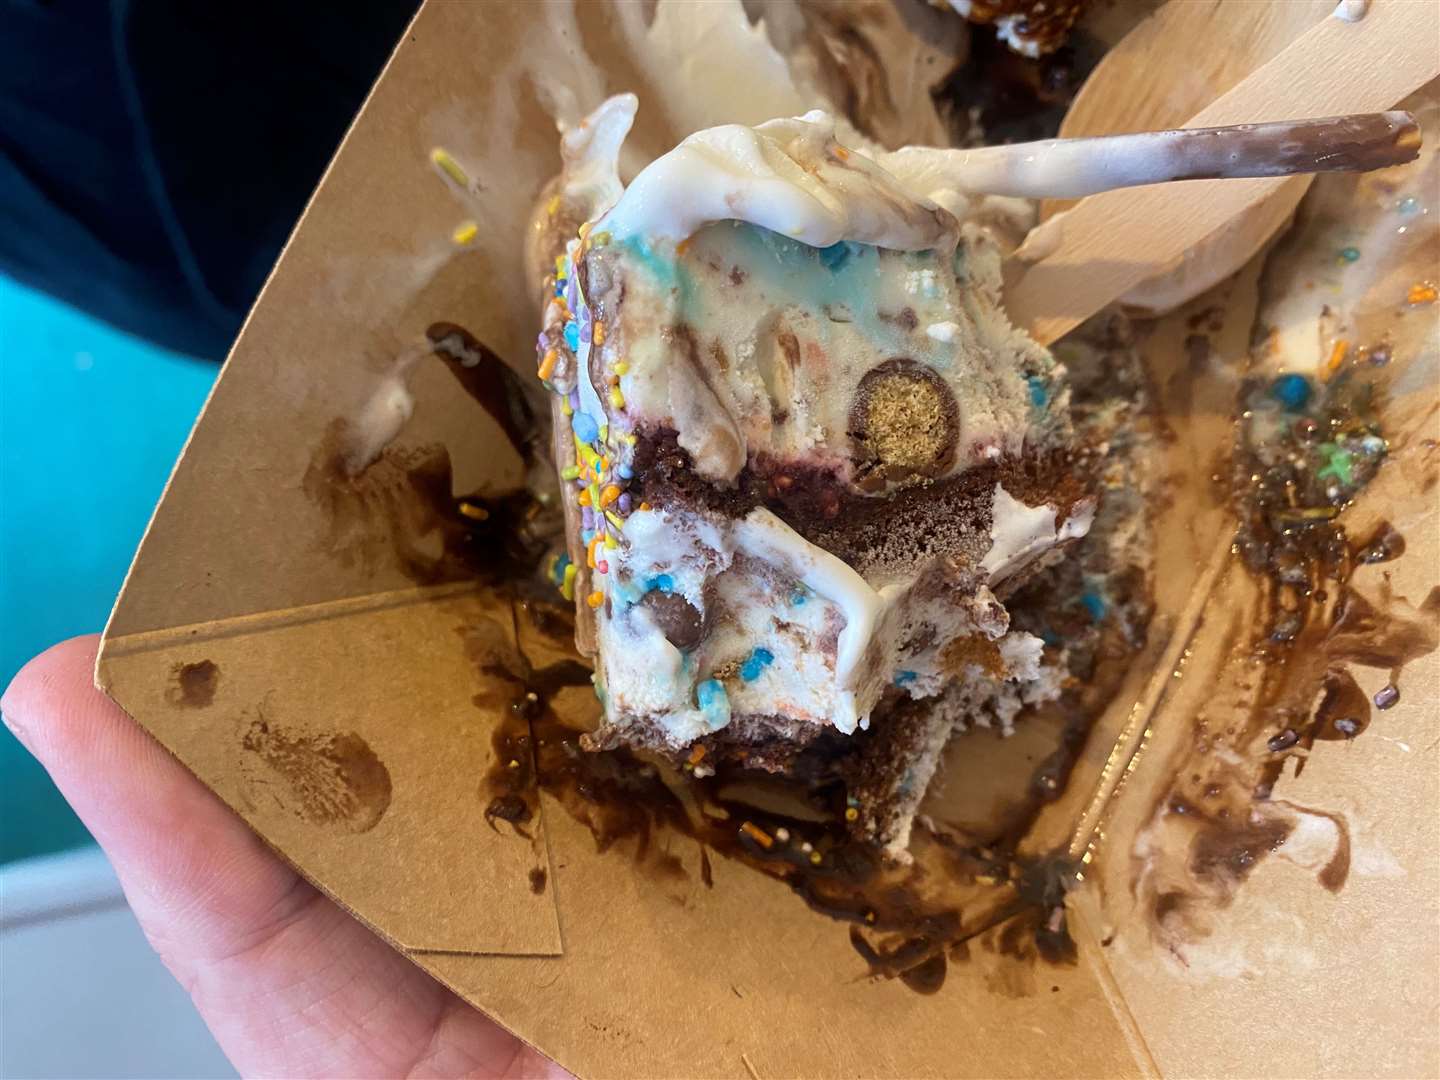 The inside of the ice cream cake is spectacularly chaotic